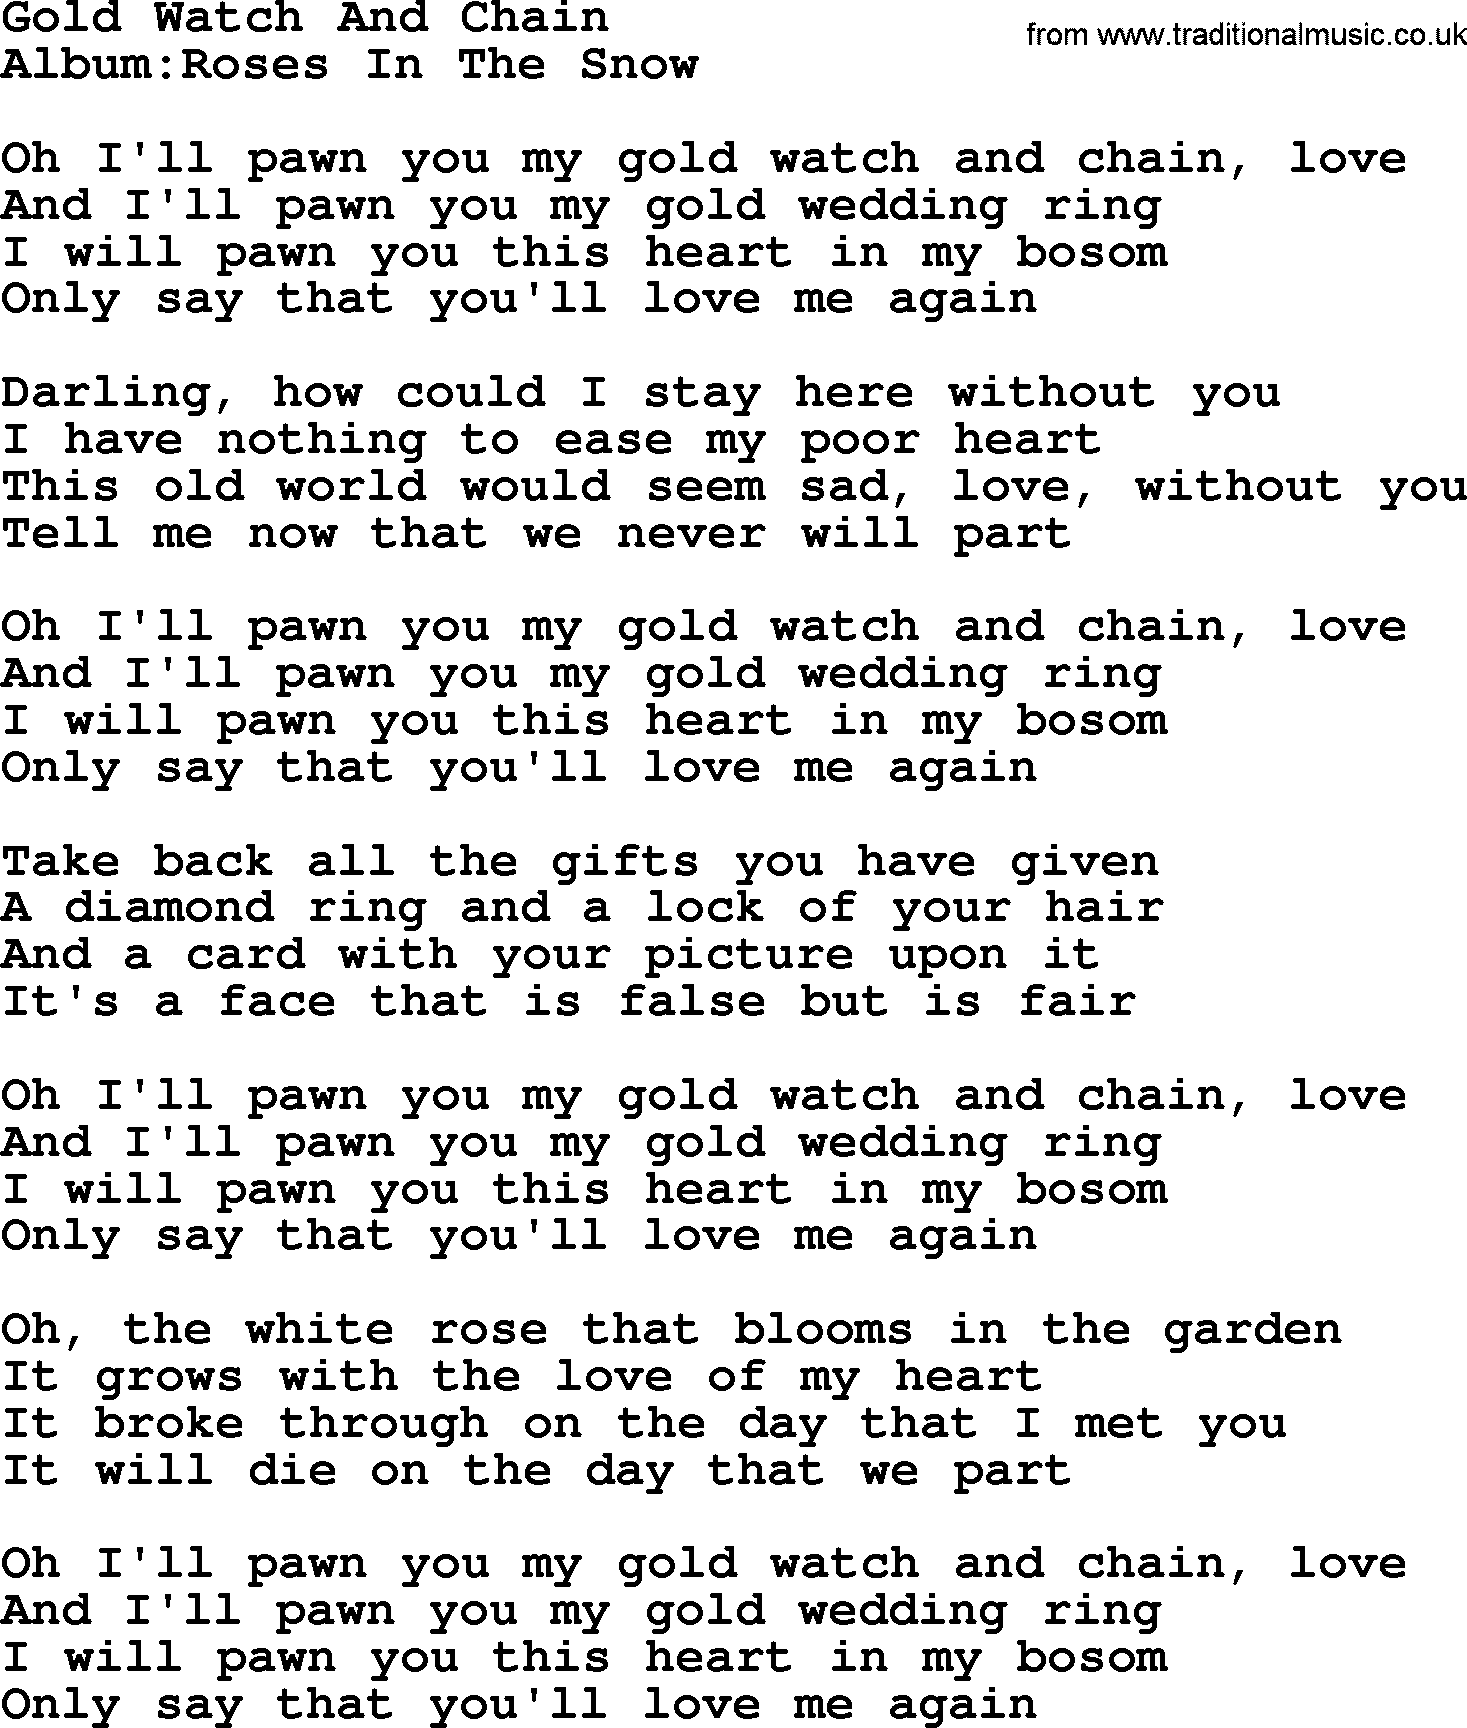 Emmylou Harris song: Gold Watch And Chain lyrics